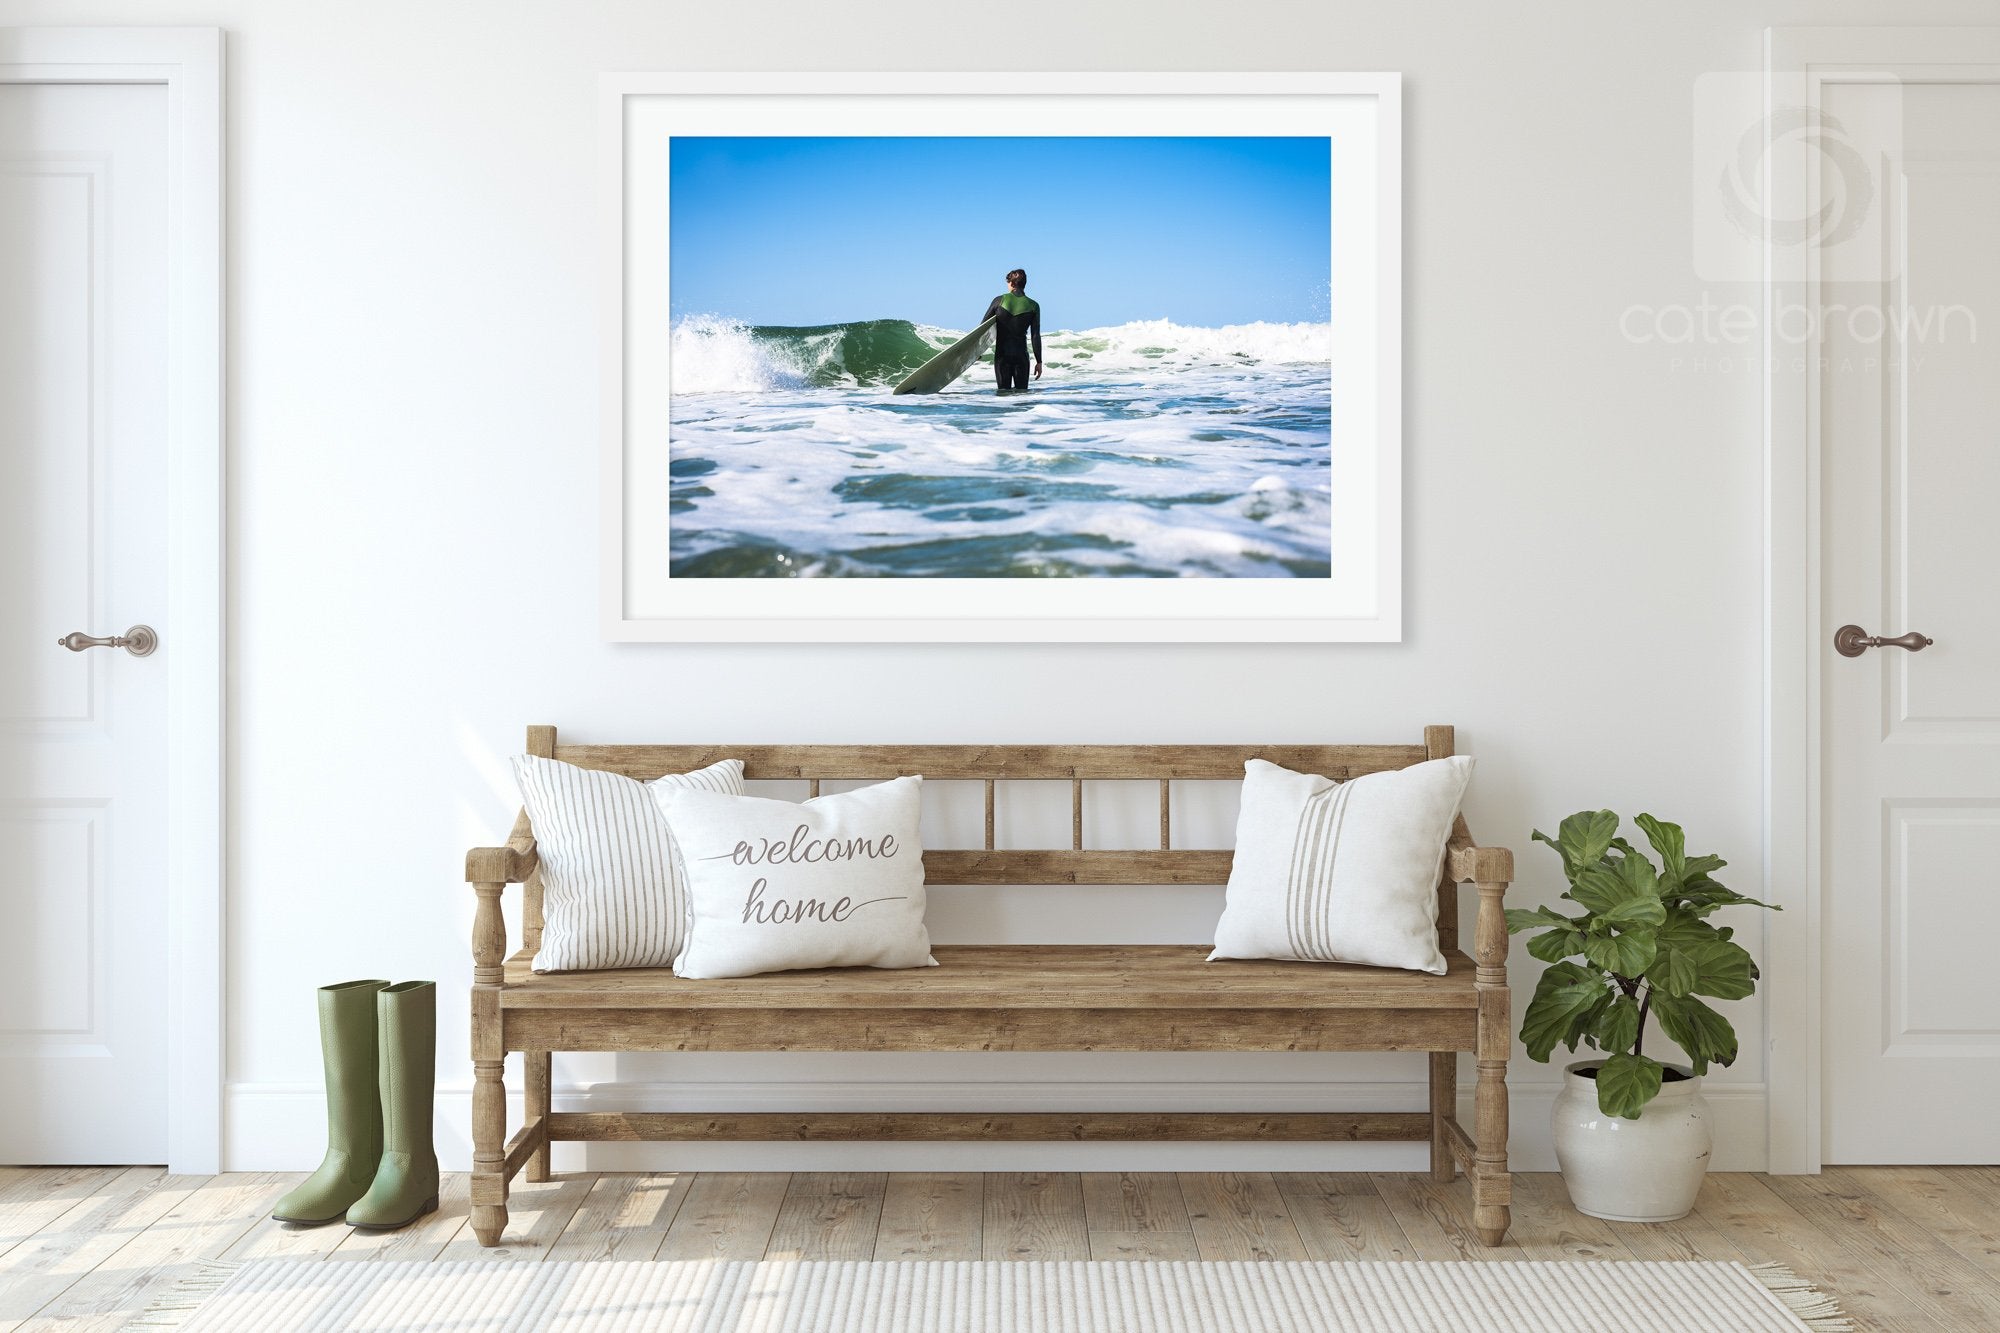 Cate Brown Photo Gus in Summer  //  Surf Photography Made to Order Ocean Fine Art